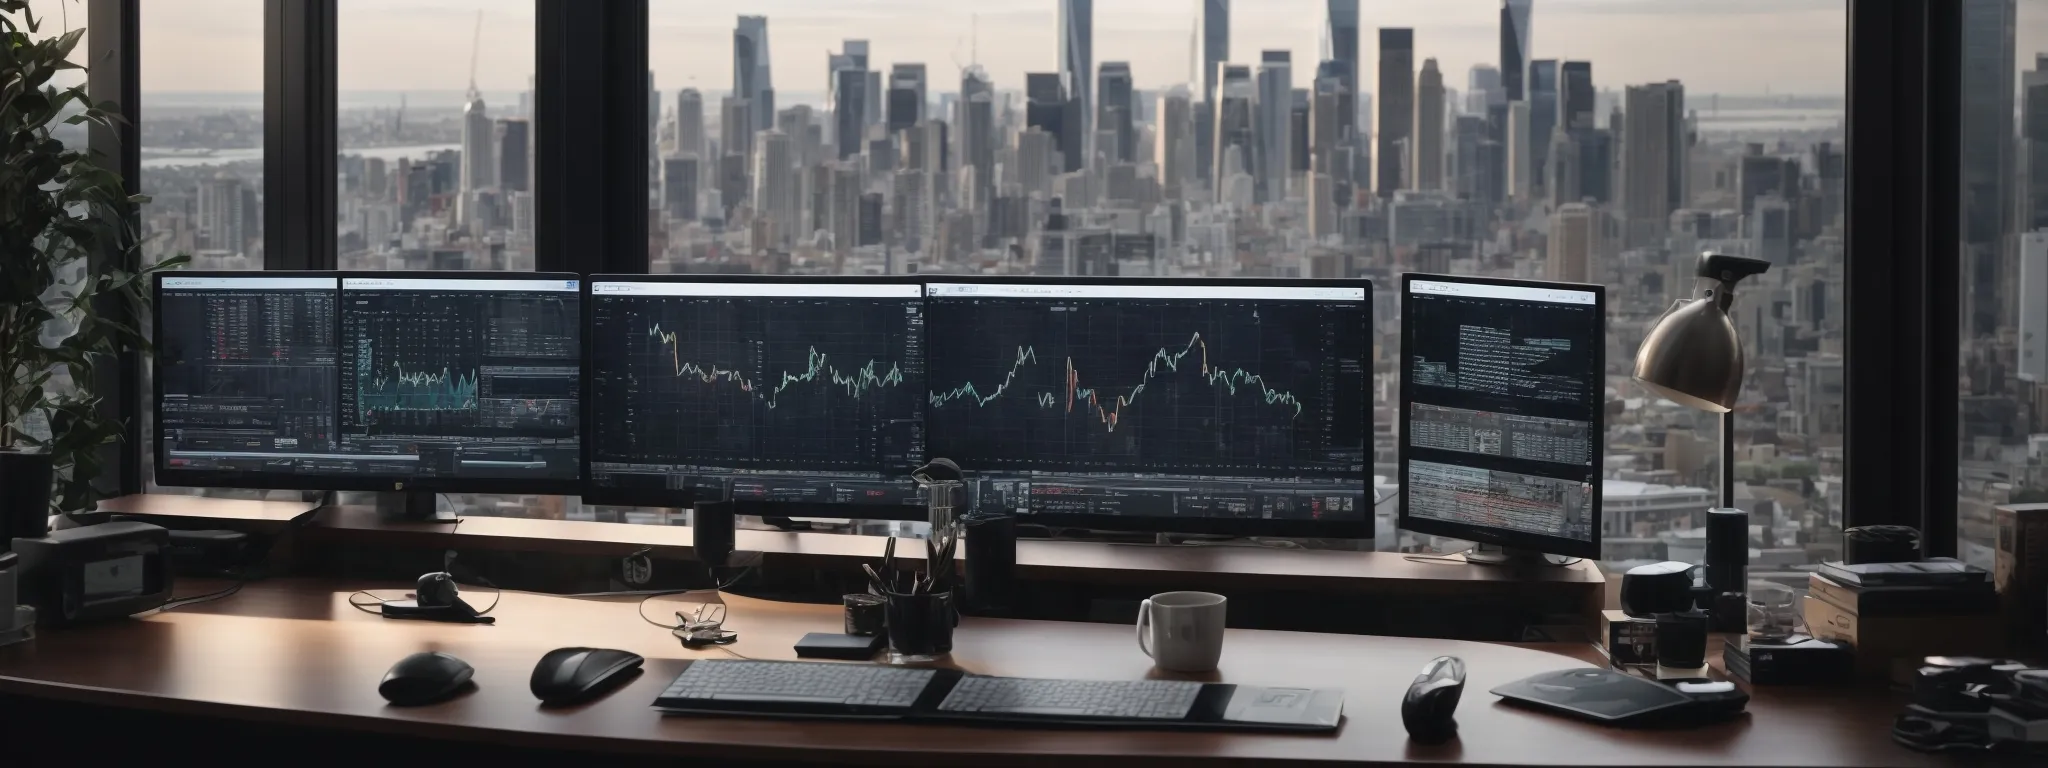 a modern home office setup with multiple screens displaying analytics and a serene view of a city skyline, symbolizing strategic seo management for real estate.